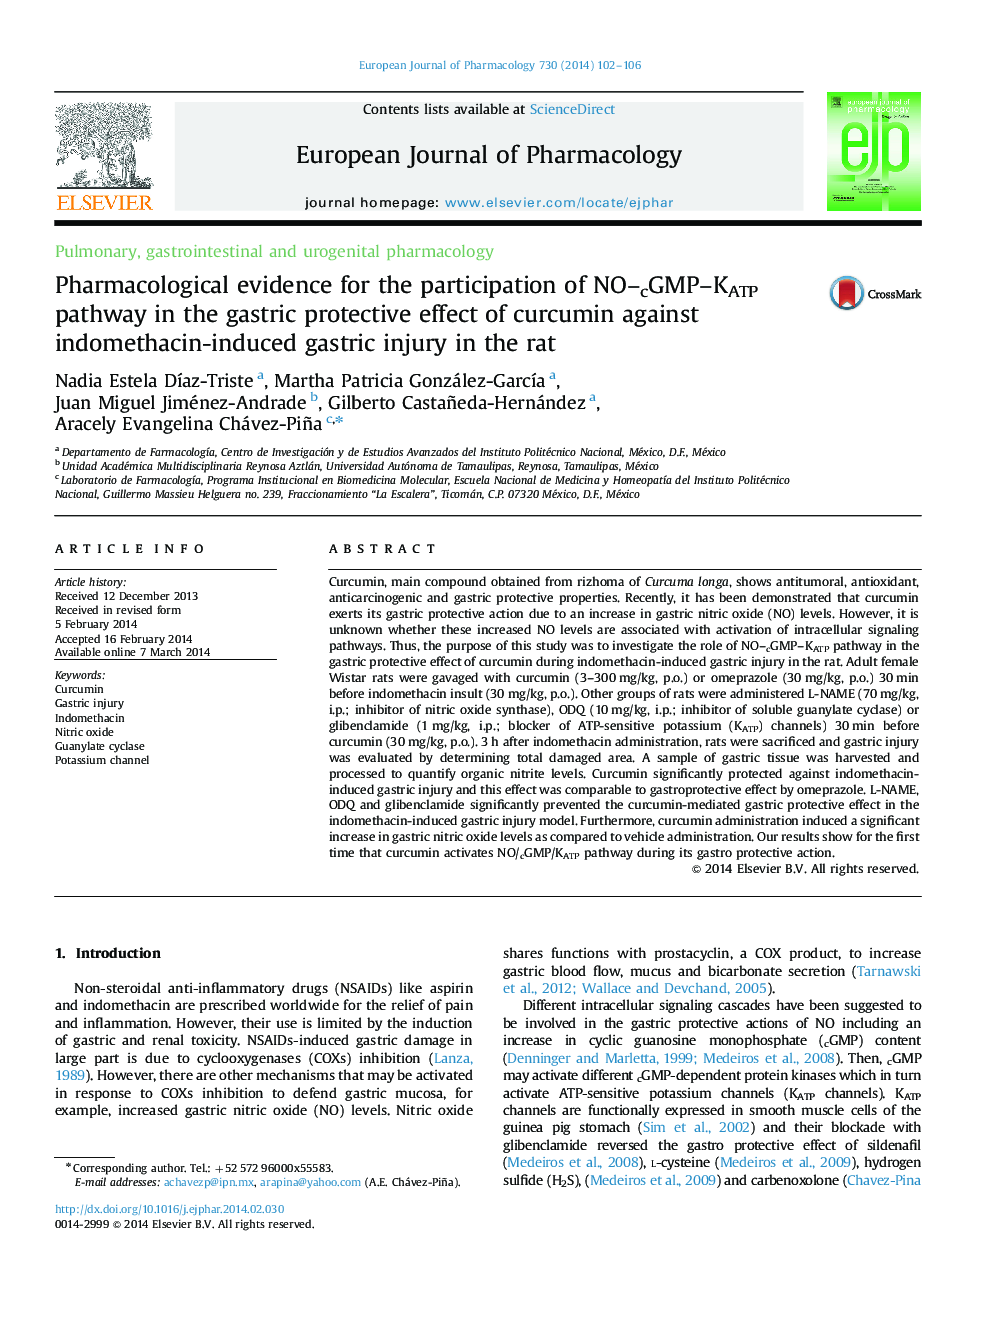 Pulmonary, gastrointestinal and urogenital pharmacologyPharmacological evidence for the participation of NO-cGMP-KATP pathway in the gastric protective effect of curcumin against indomethacin-induced gastric injury in the rat